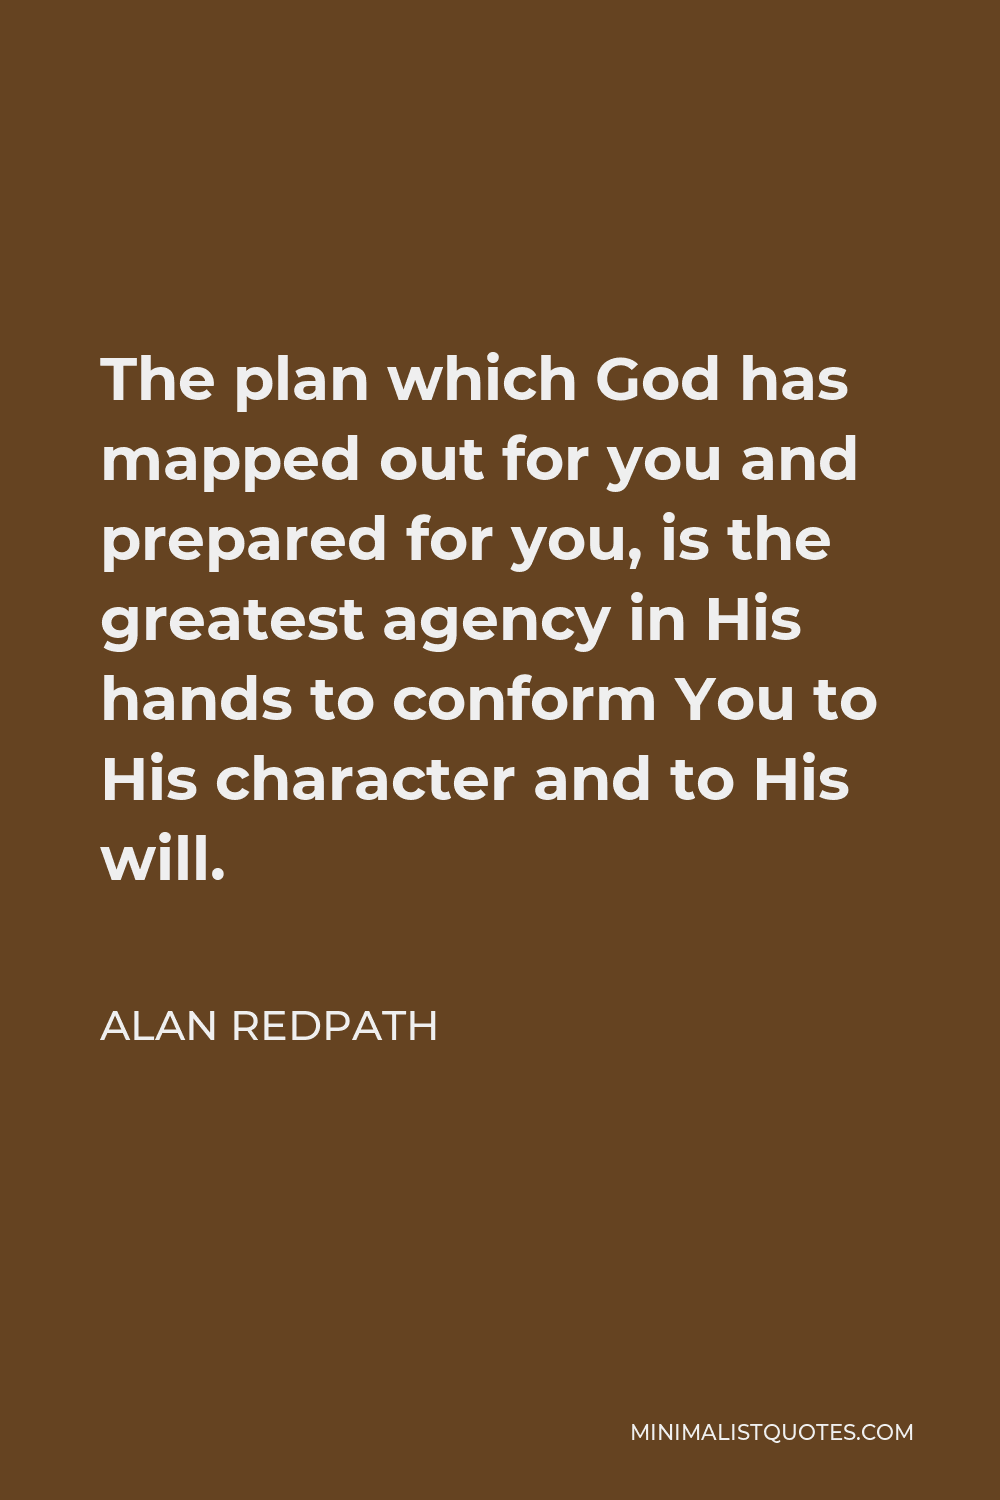 Alan Redpath Quote - The plan which God has mapped out for you and prepared for you, is the greatest agency in His hands to conform You to His character and to His will.